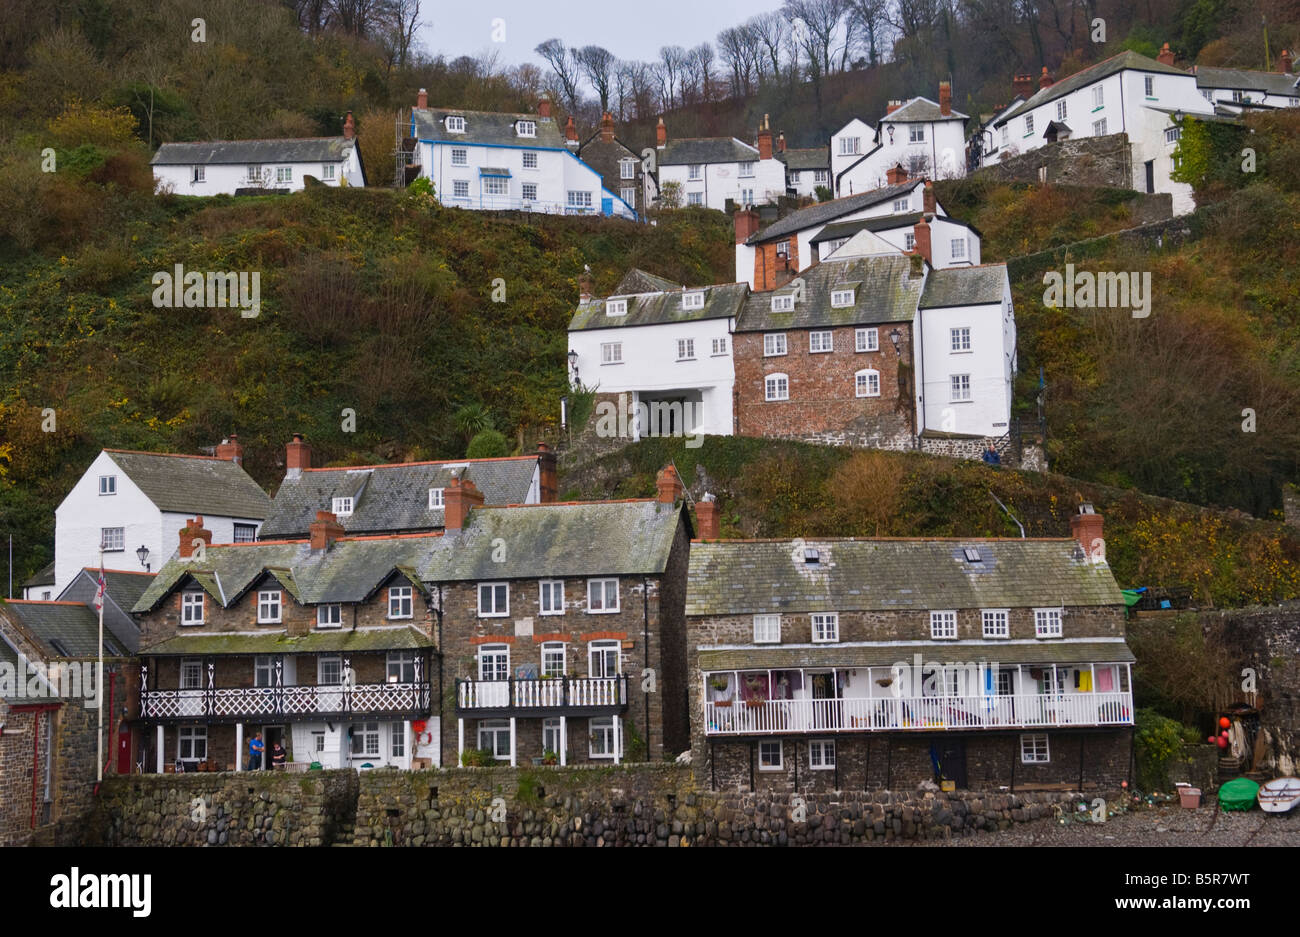 View Of Cottages From The Harbour In The Coastal Village Of